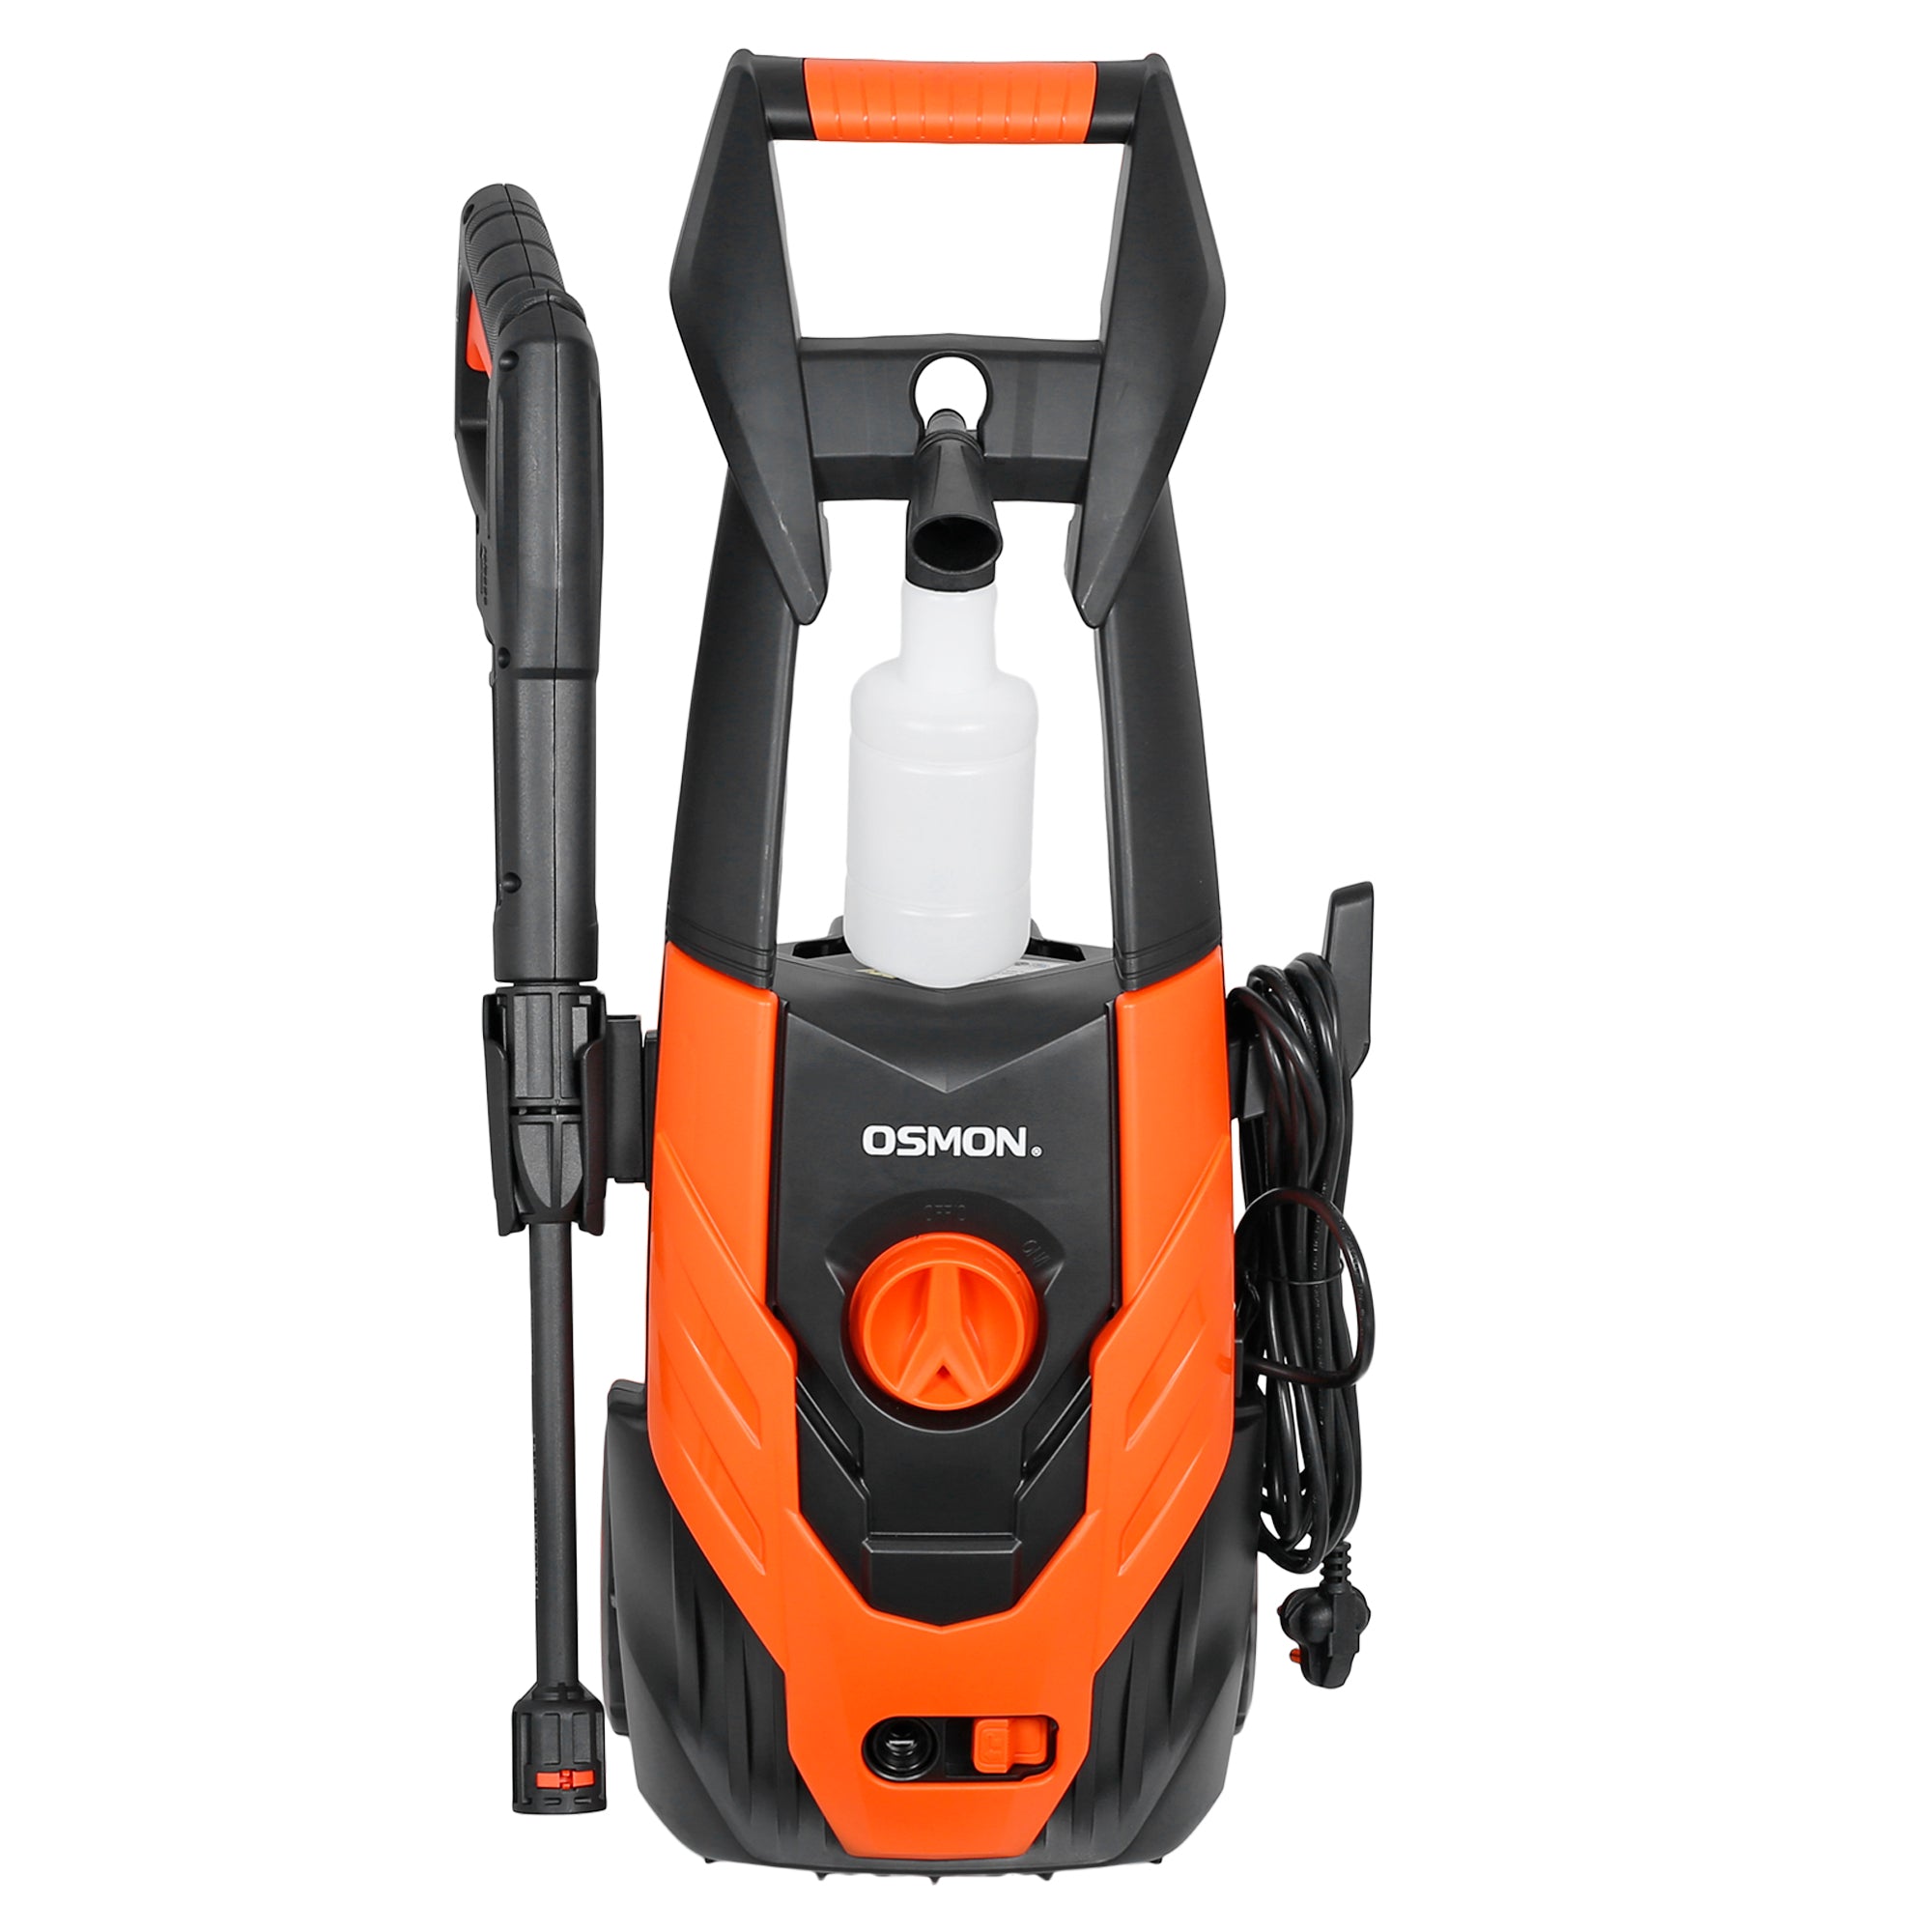 A vibrant orange OS PW140 pressure washer, ideal for cleaning cars, bikes, and office/home spaces